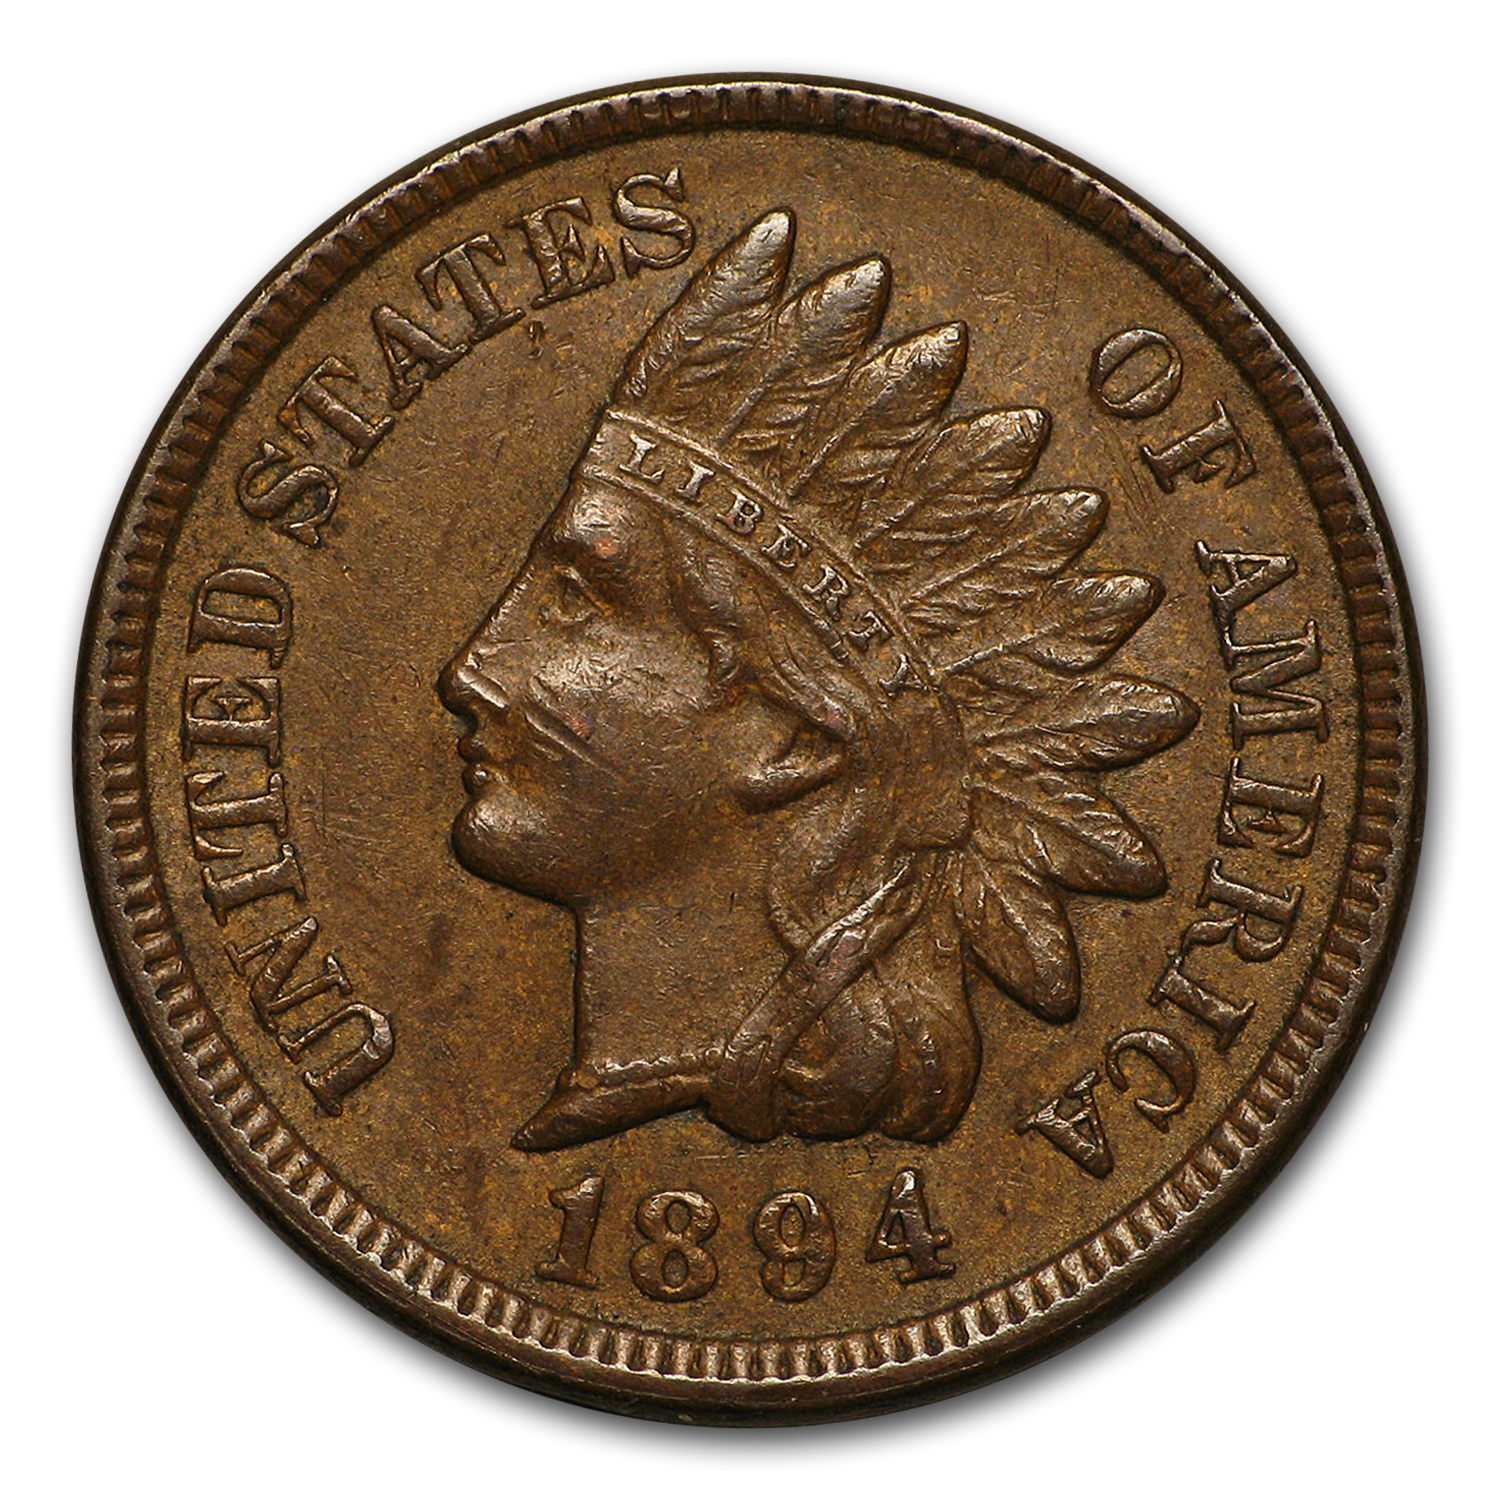 Buy 1894 Indian Head Cent XF